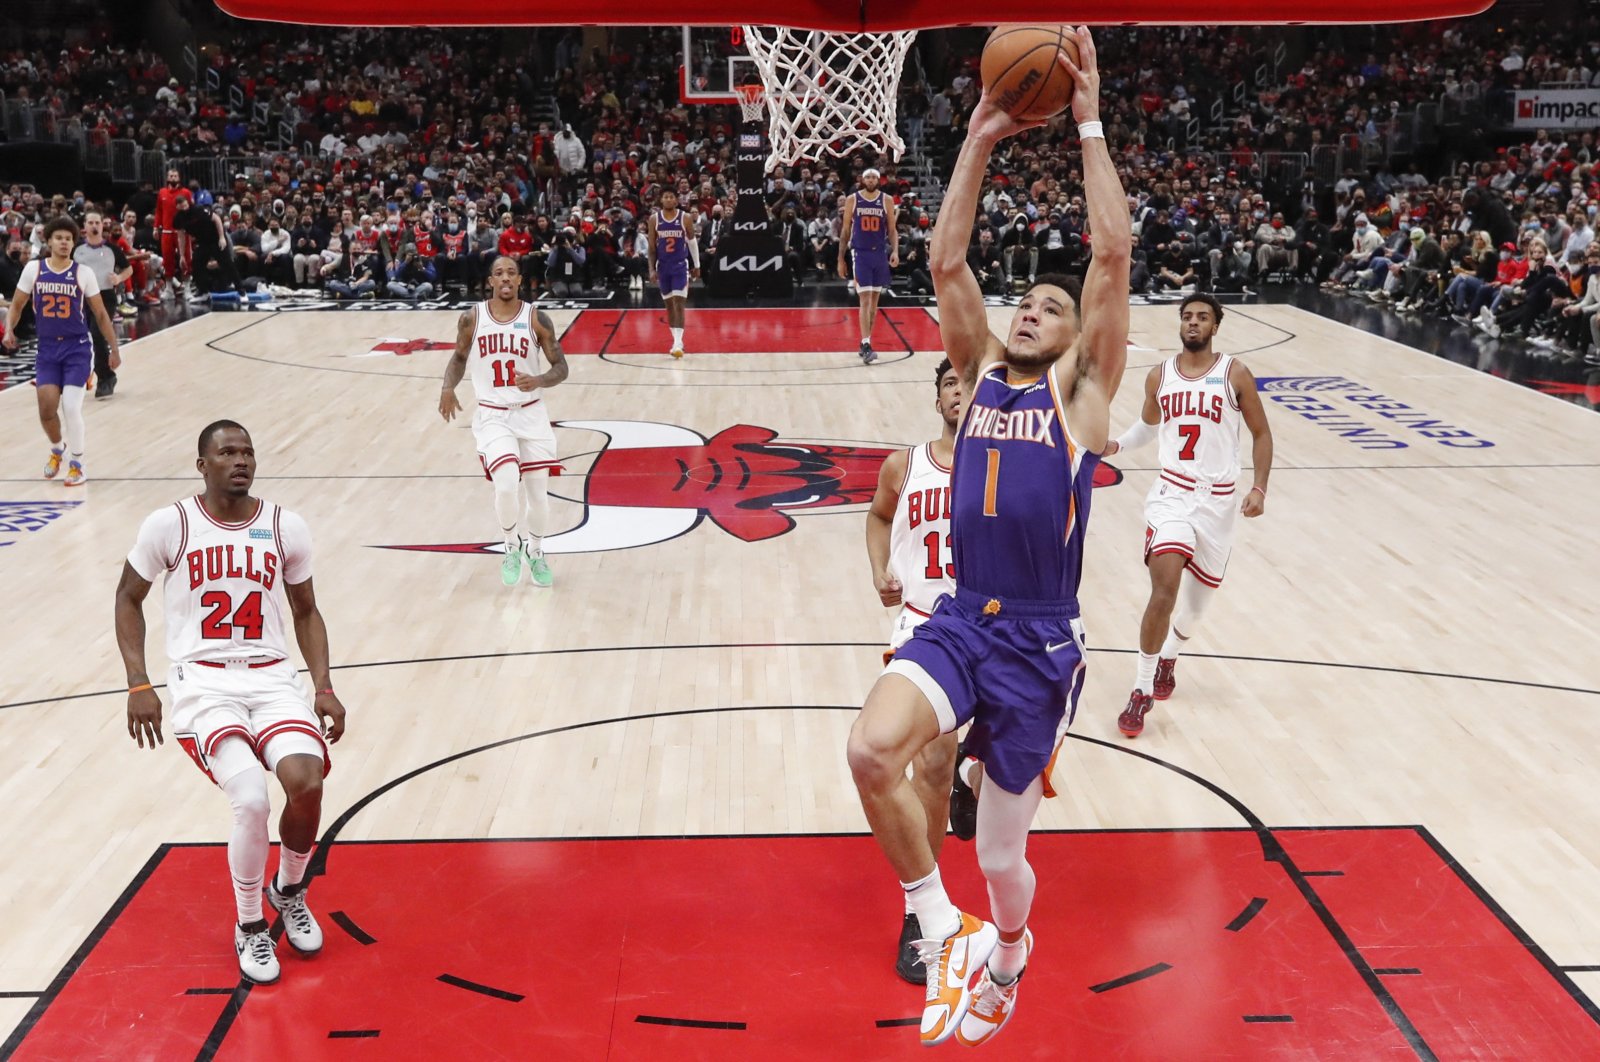 Phoenix Suns guard Devin Booker (R) goes to the basket during an NBA game against the Chicago Bulls, Chicago, Illinois, U.S., Feb 7, 2022. (Reuters Photo)